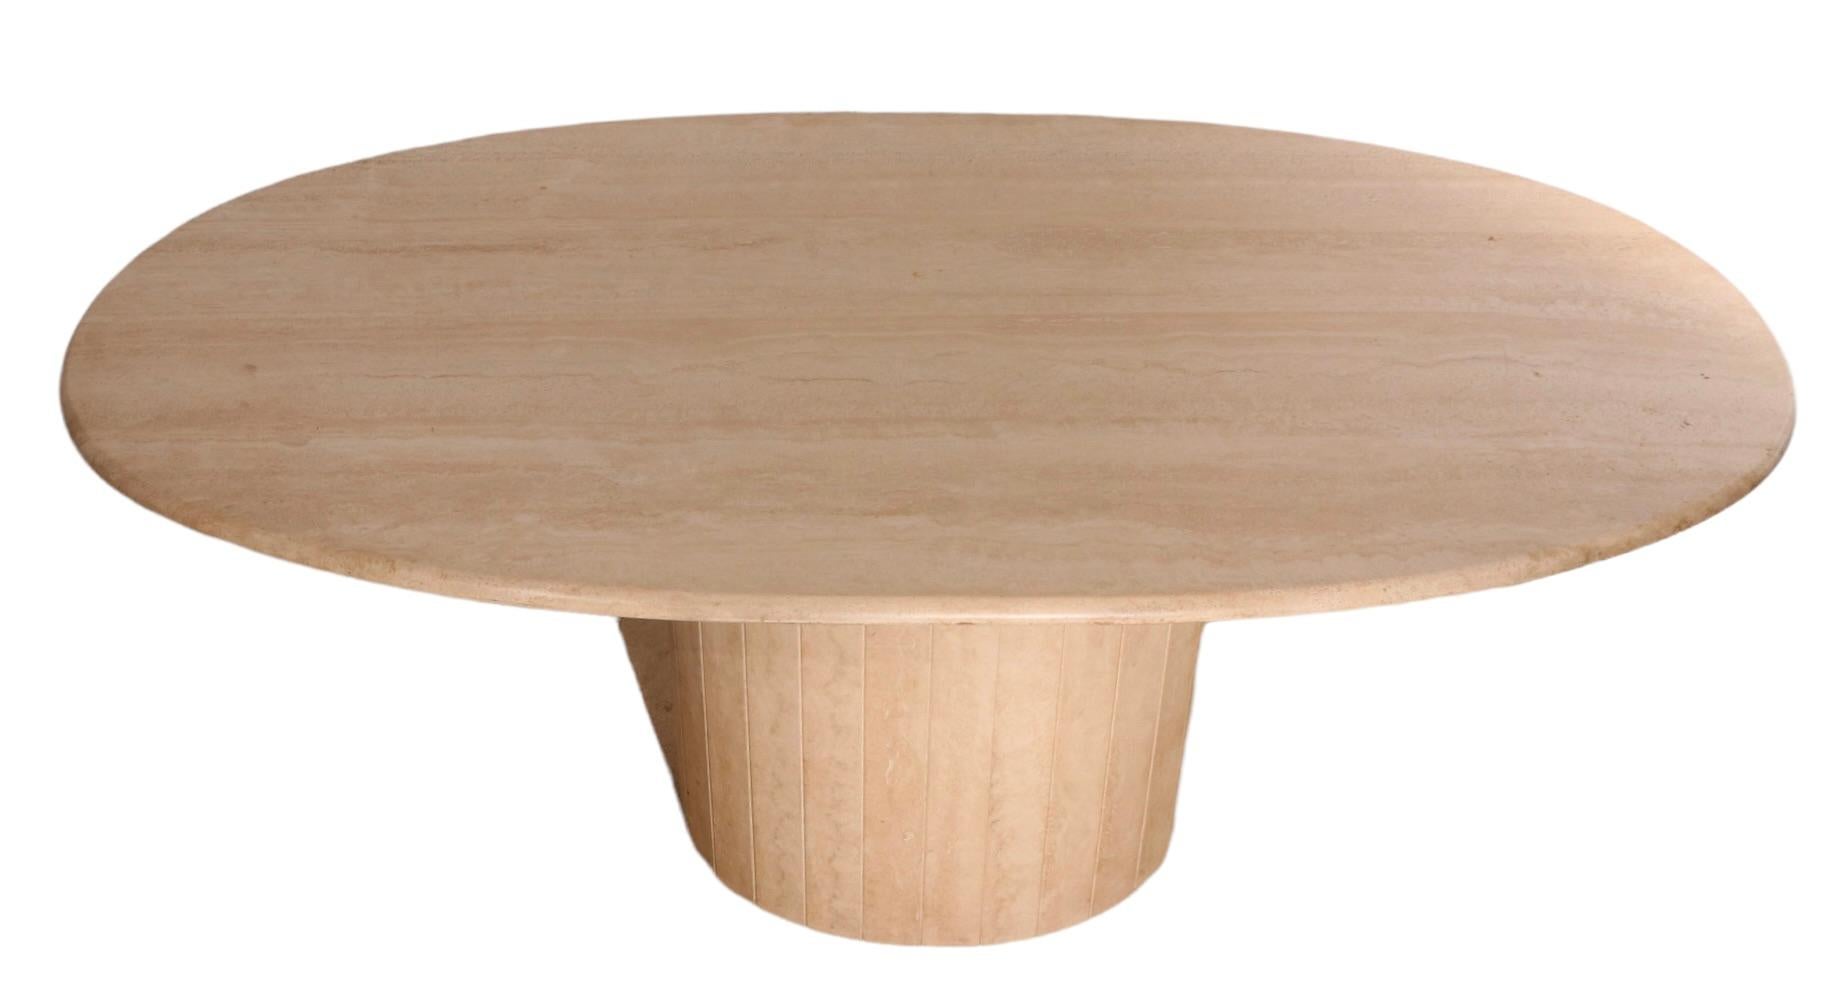 Super chic oval travertine marble dining table on segmented oval base. The table features a thick ( 1 in. ) top of solid marble, which has a rounded polished edge. The top rests on it’s original oval base ( 22.5 H x 25 W x 17.5 D in. )  which is